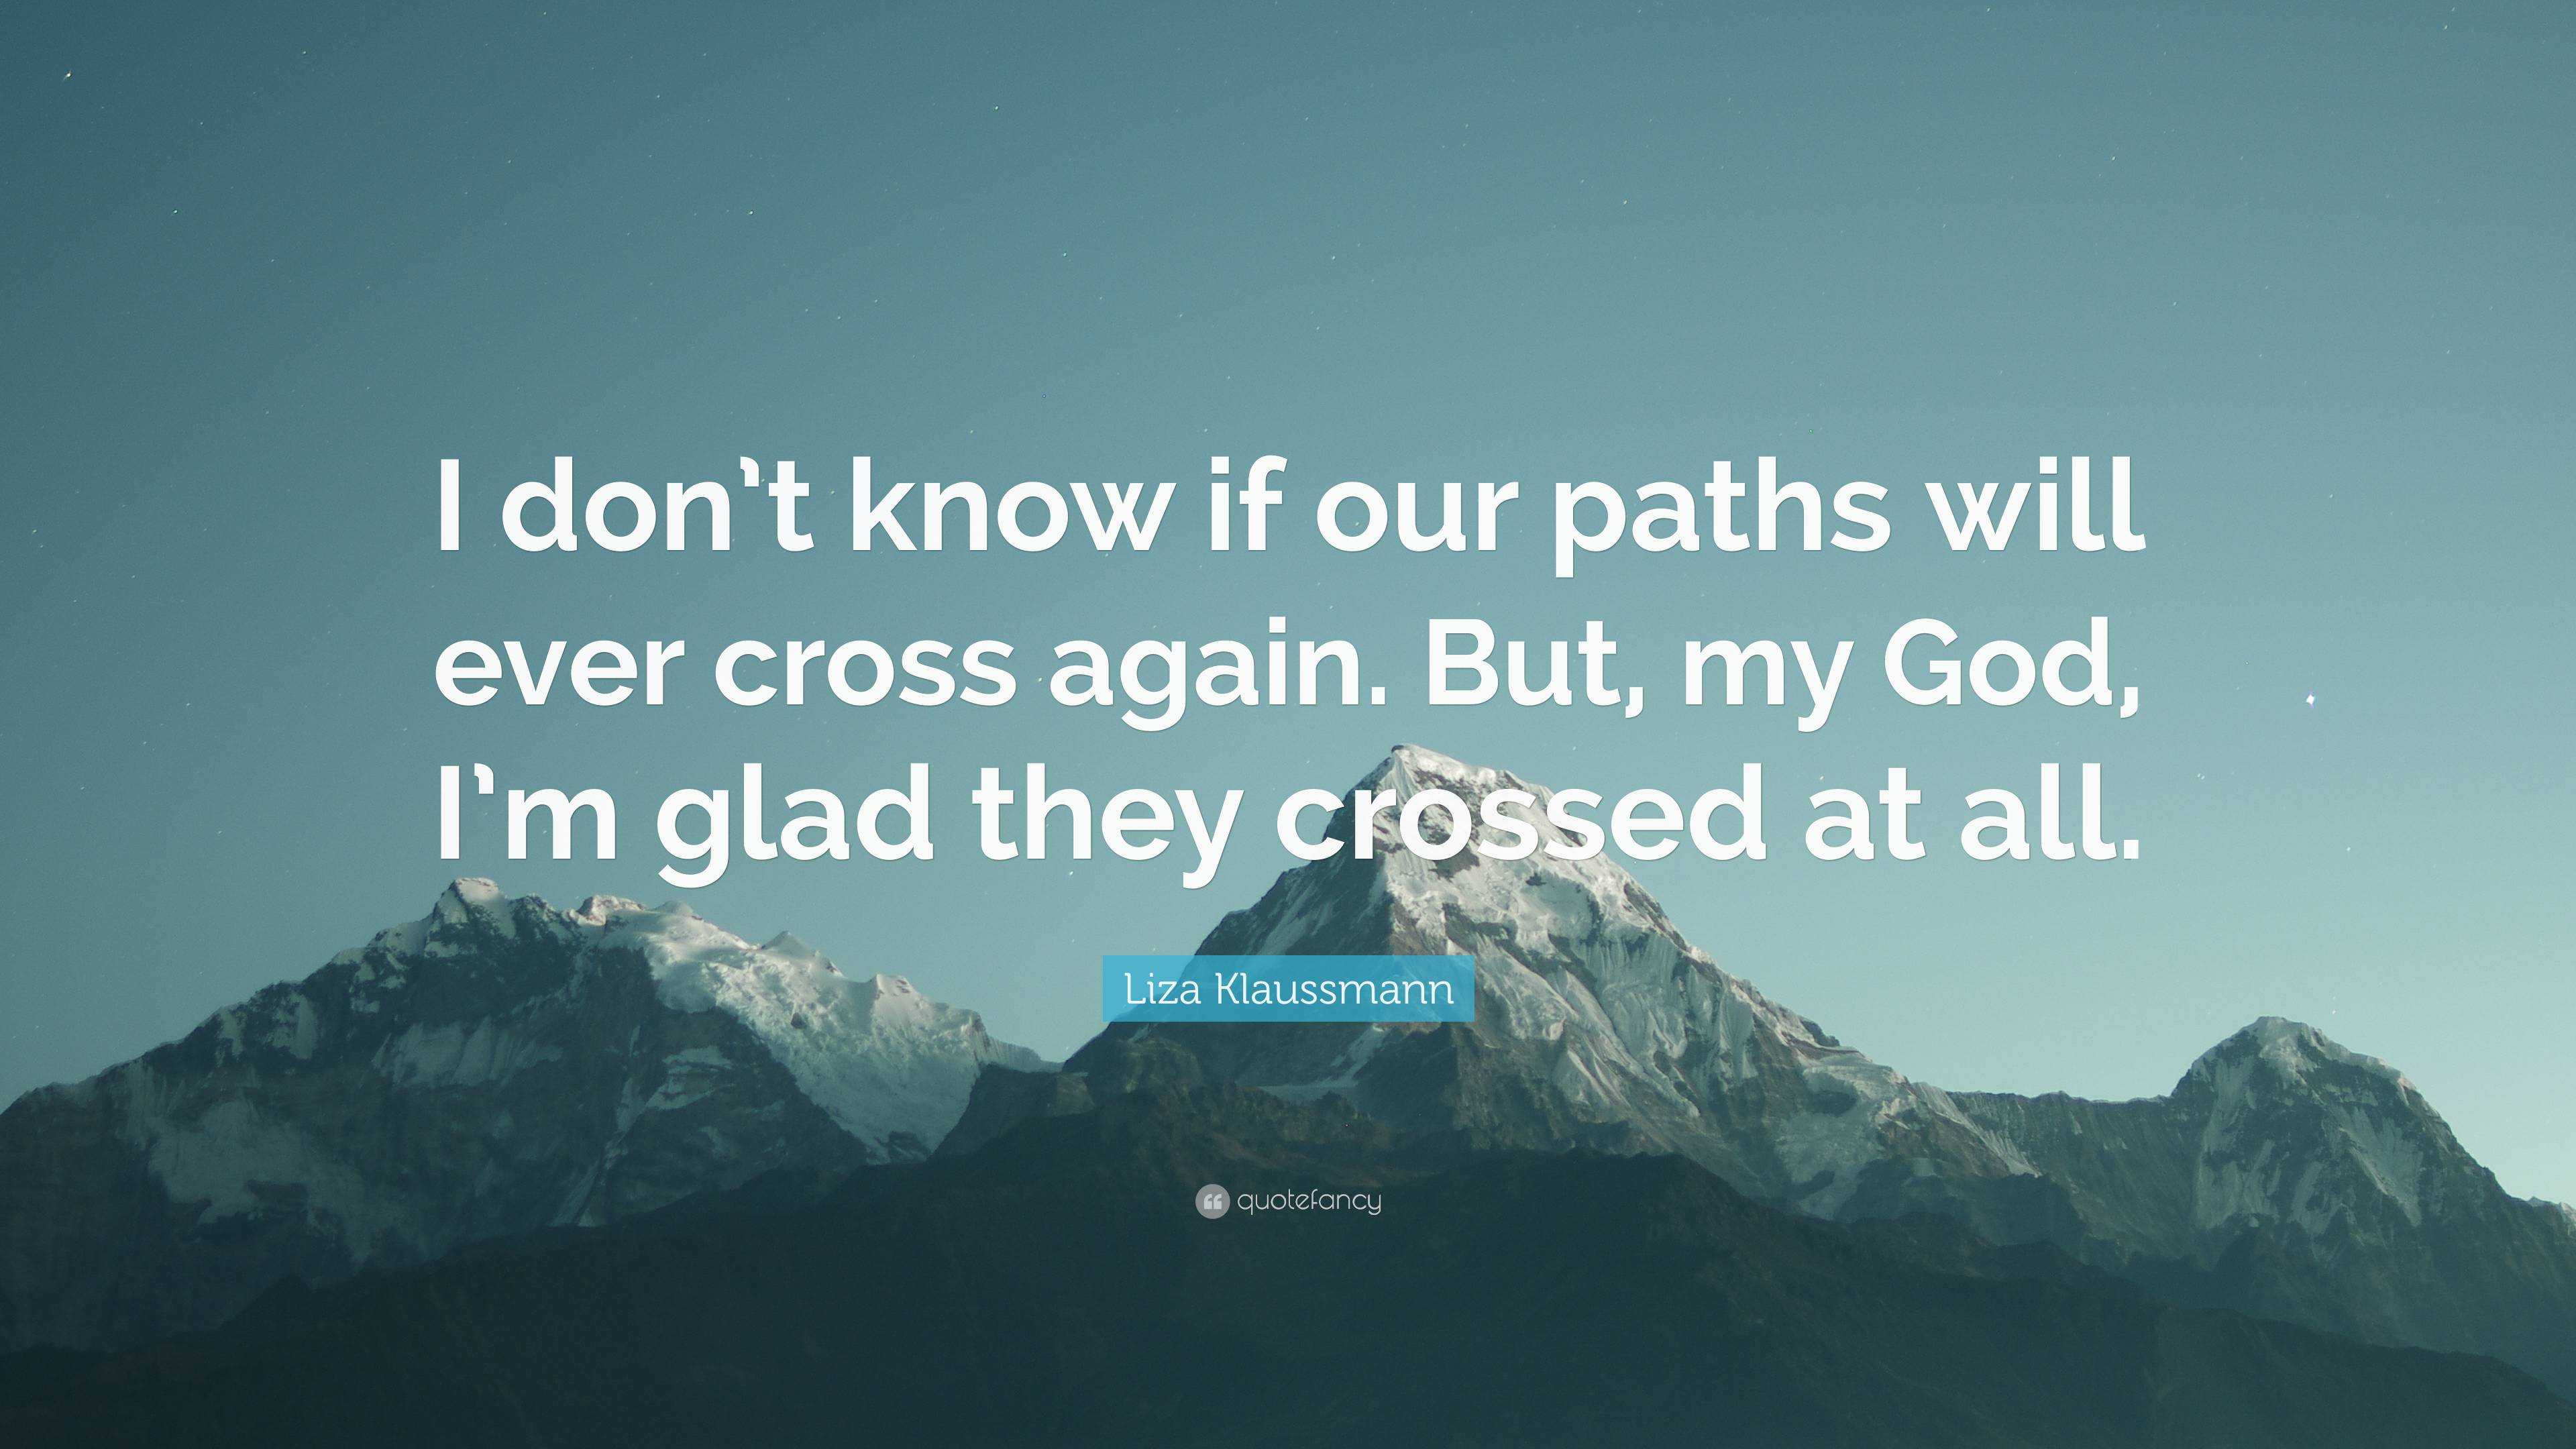 Liza Klaussmann Quote: “I don't know if our paths will ever cross again. But,  my